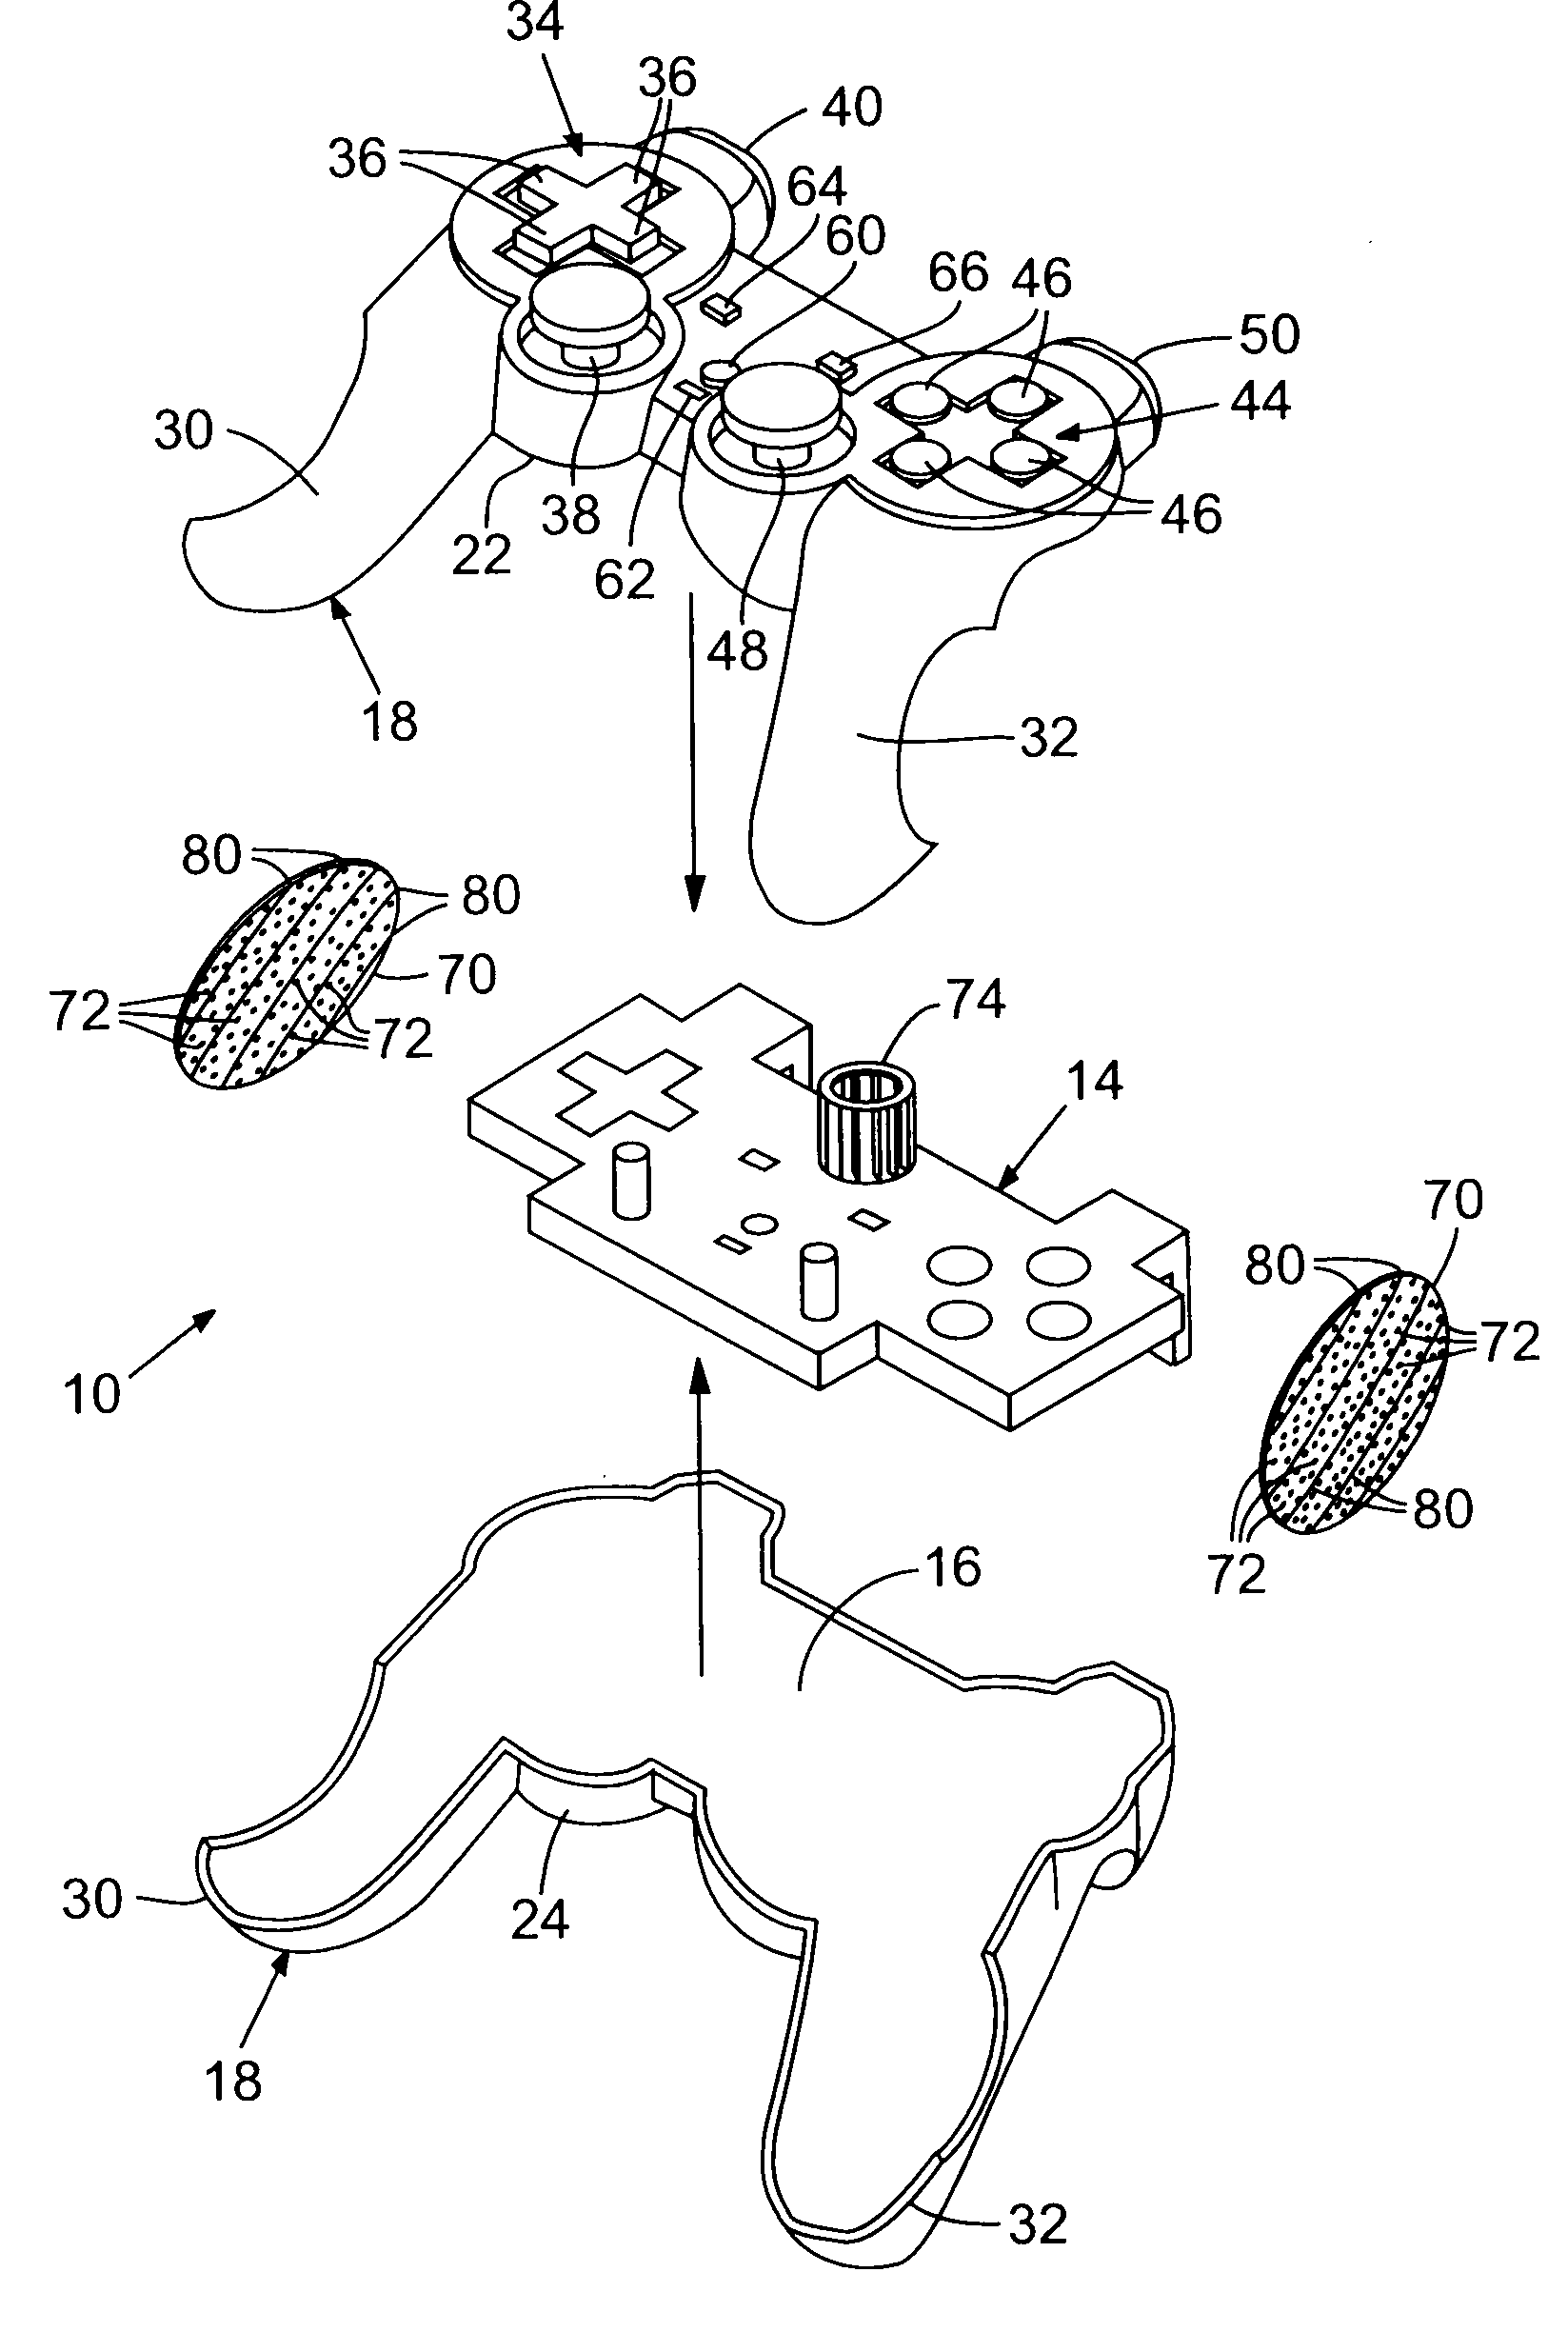 Power conserving system for hand-held controllers